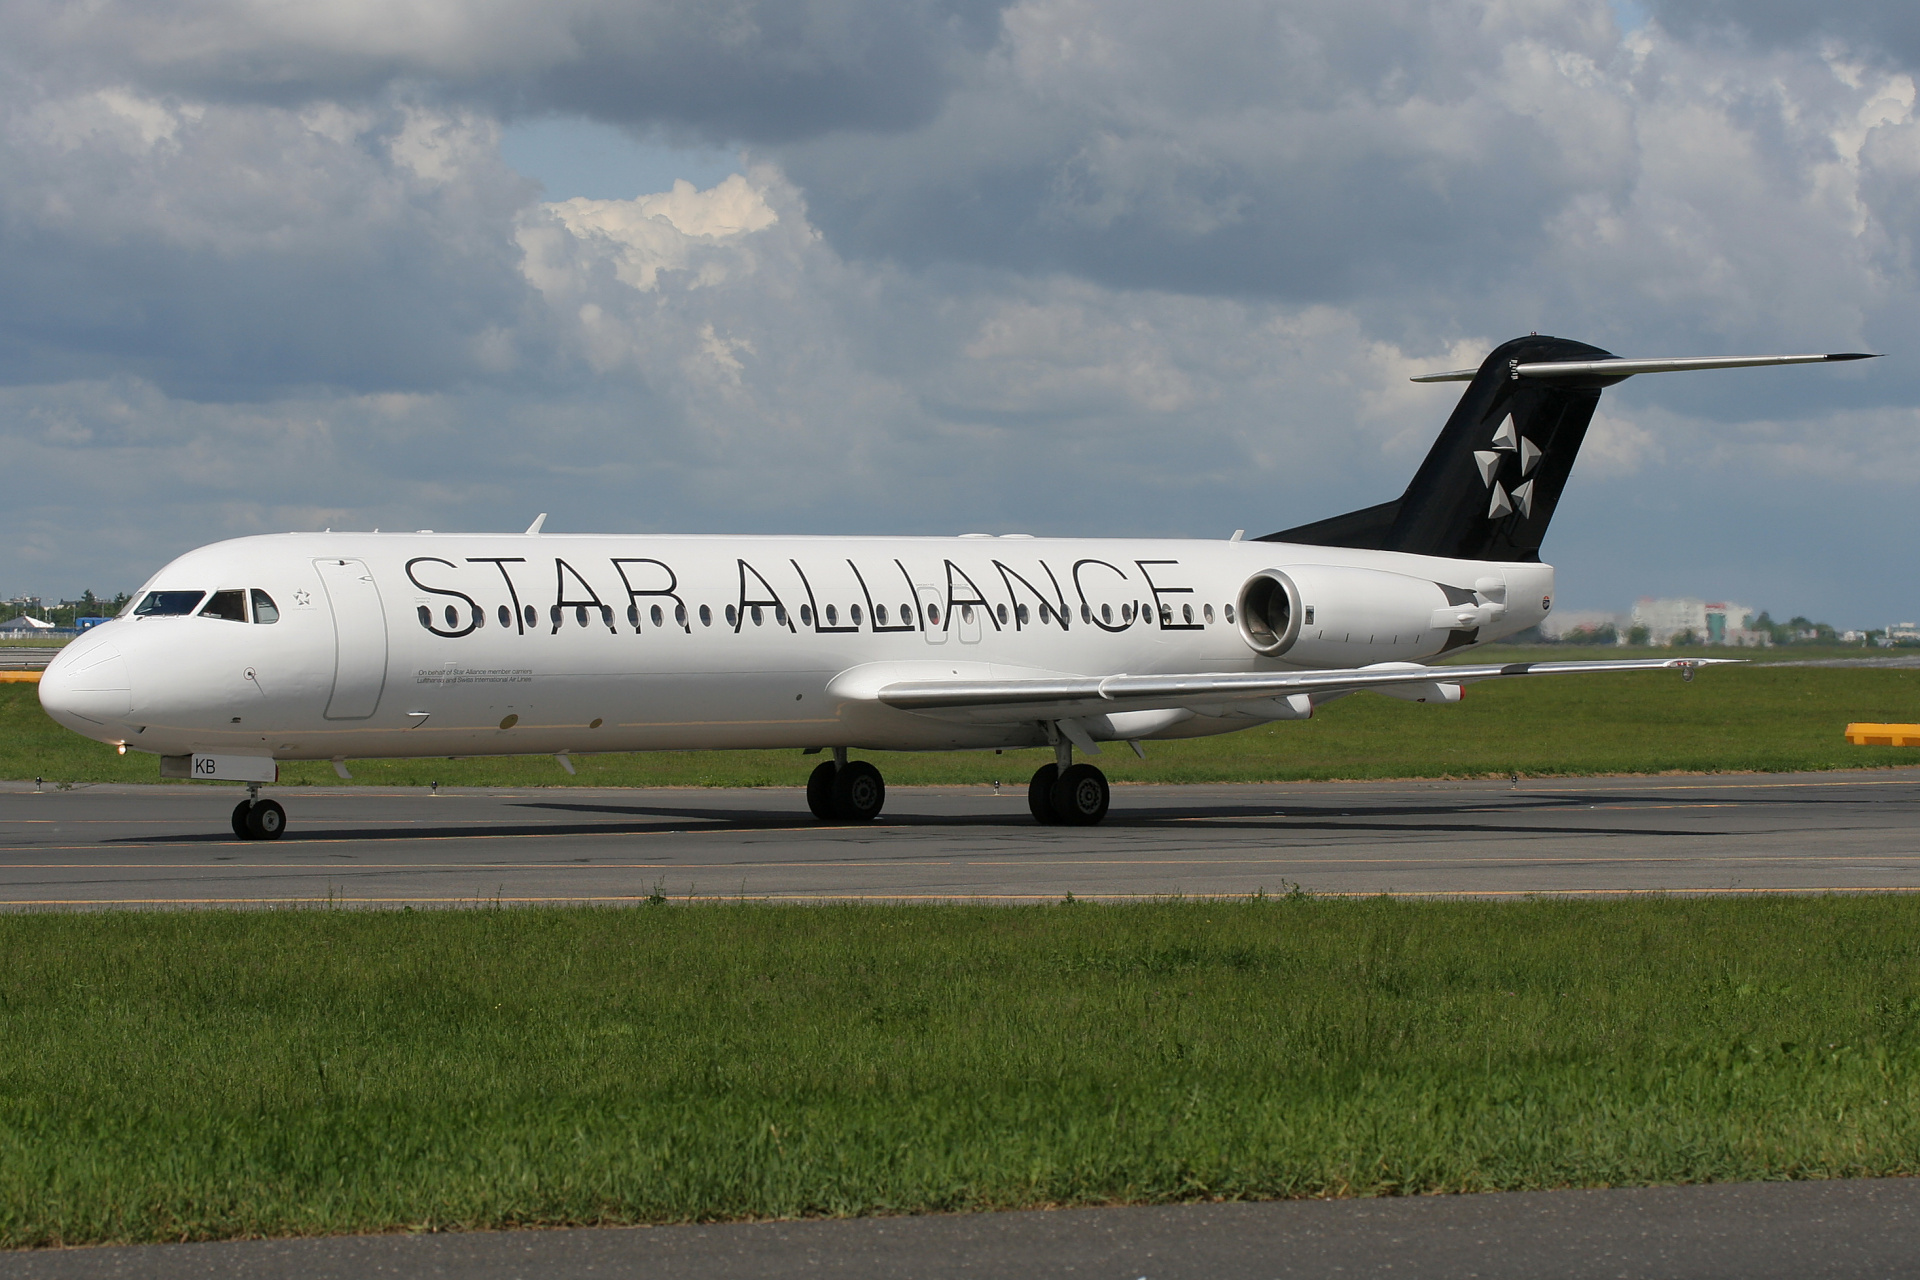 D-AFKB (Star Alliance livery) (Aircraft » EPWA Spotting » Fokker 100 » Contact Air)